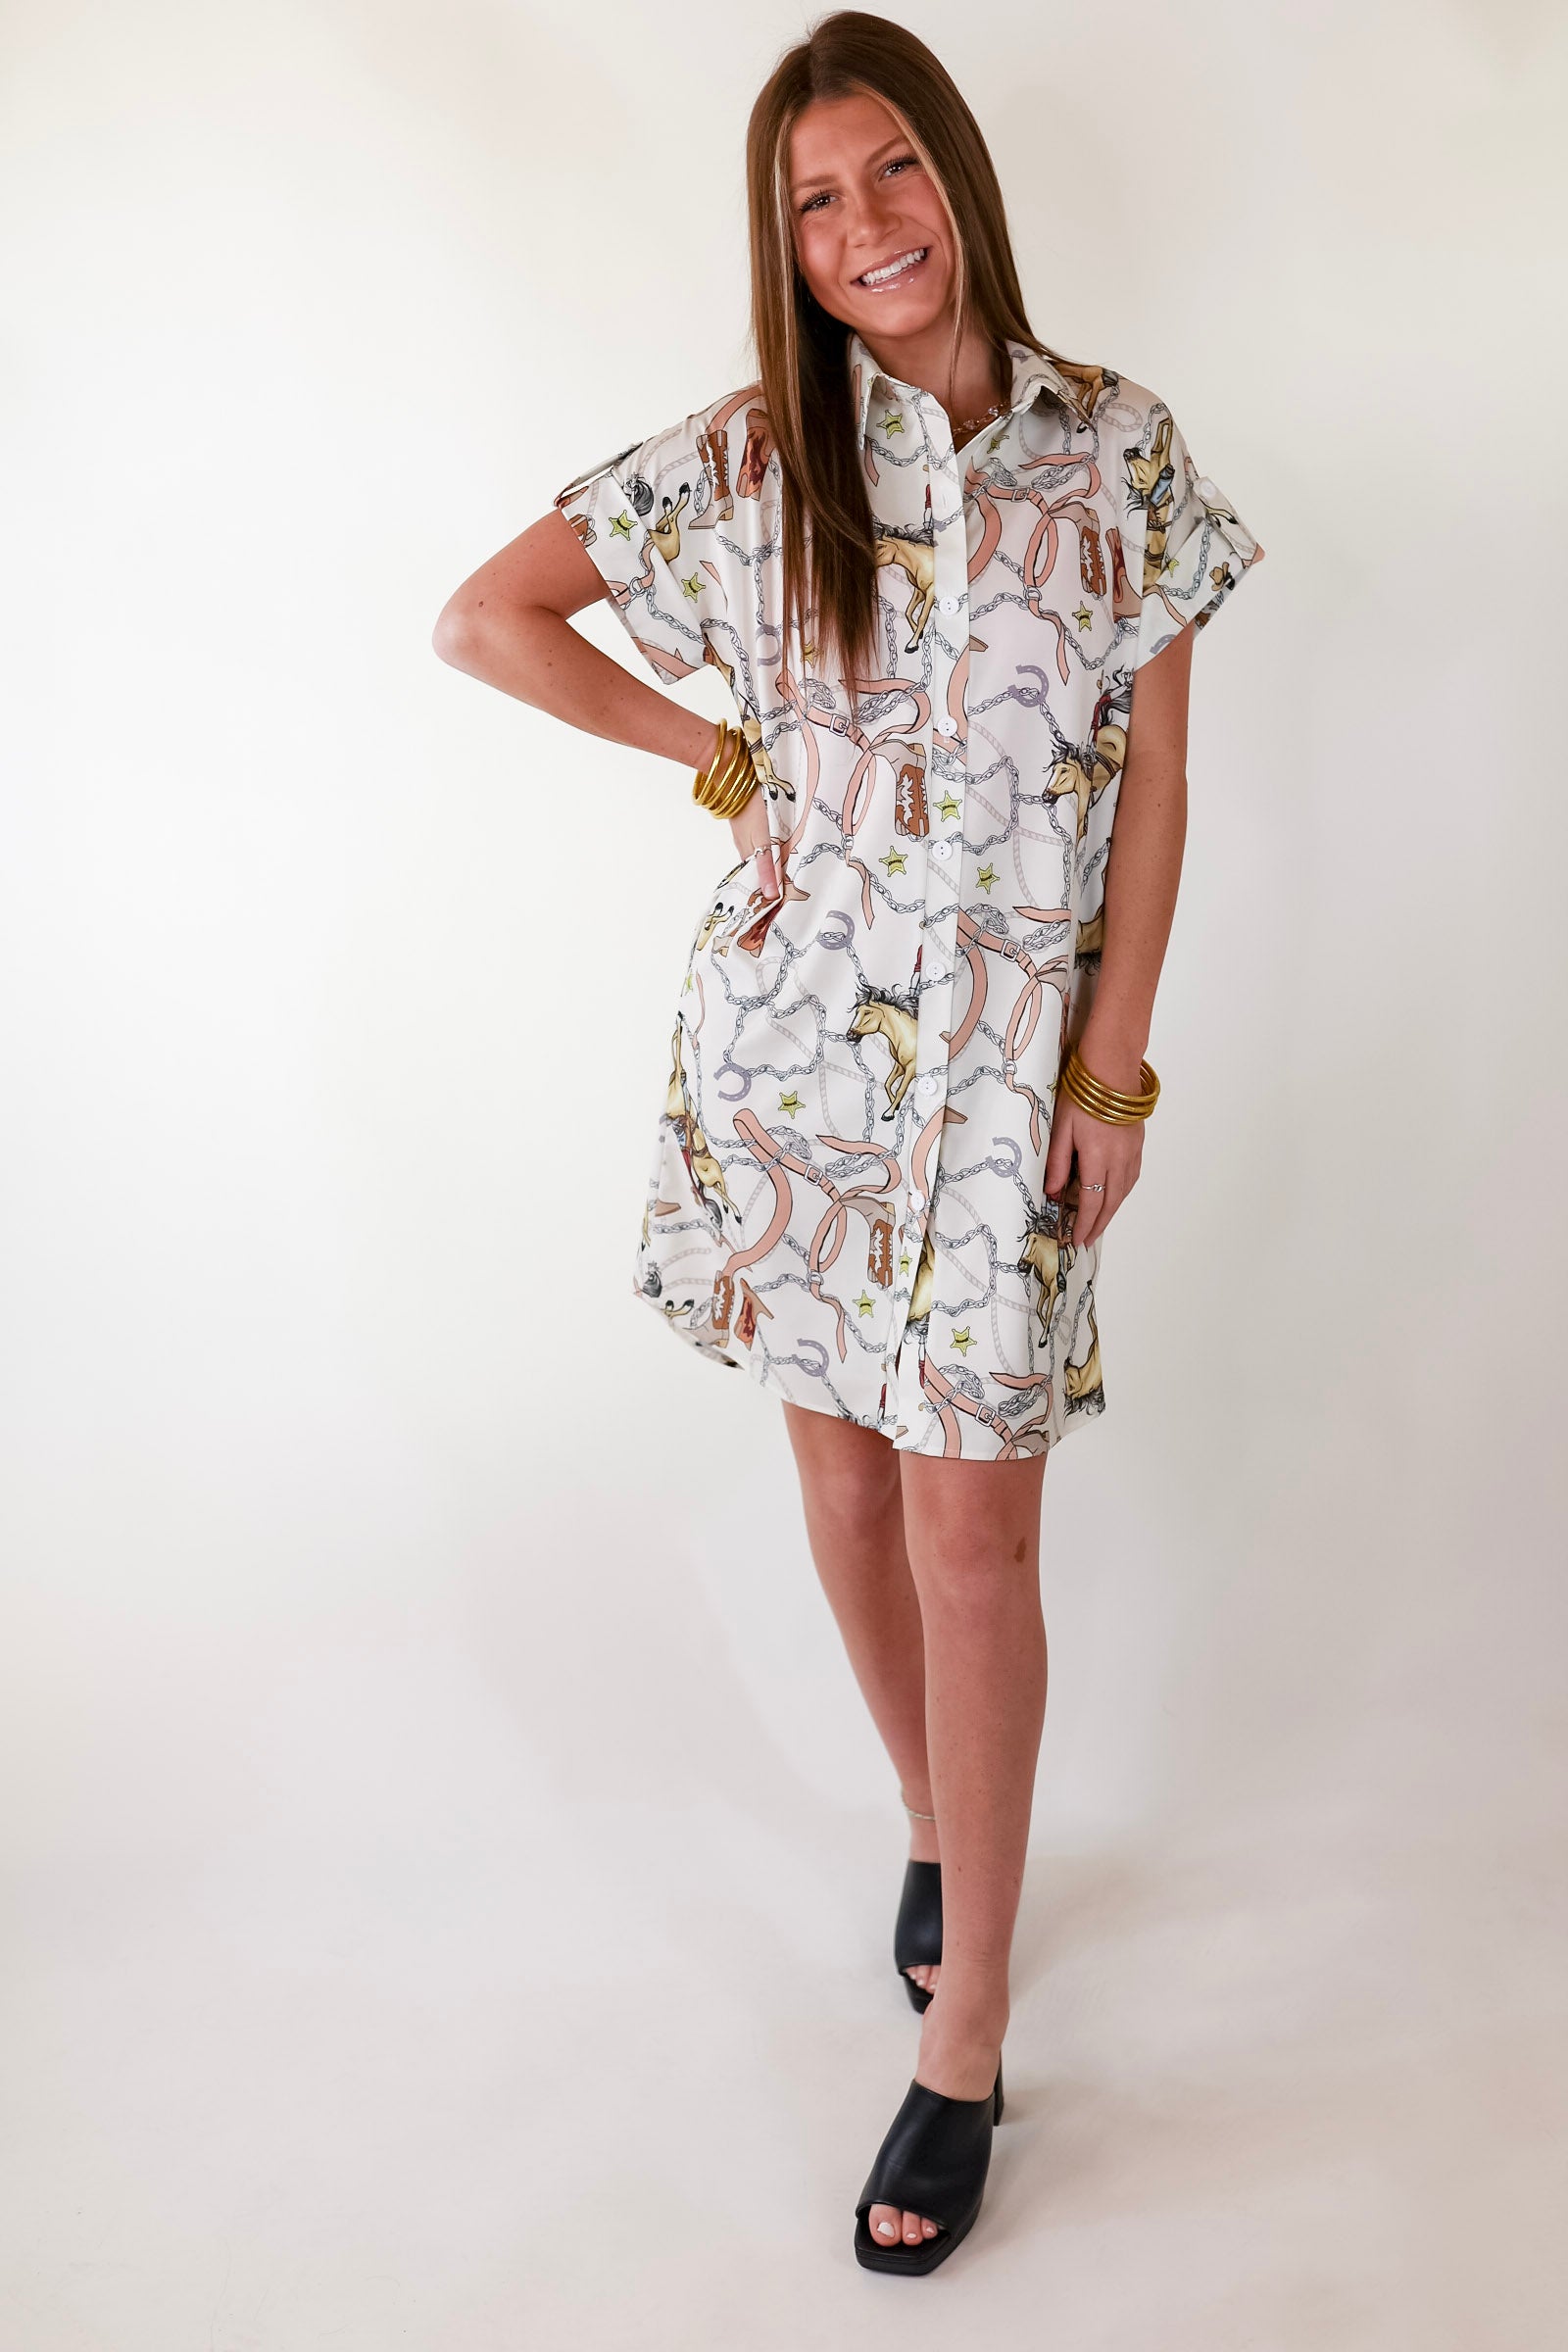 The Cowgirl Way Button Up Cowboy Print Dress in Cream - Giddy Up Glamour Boutique